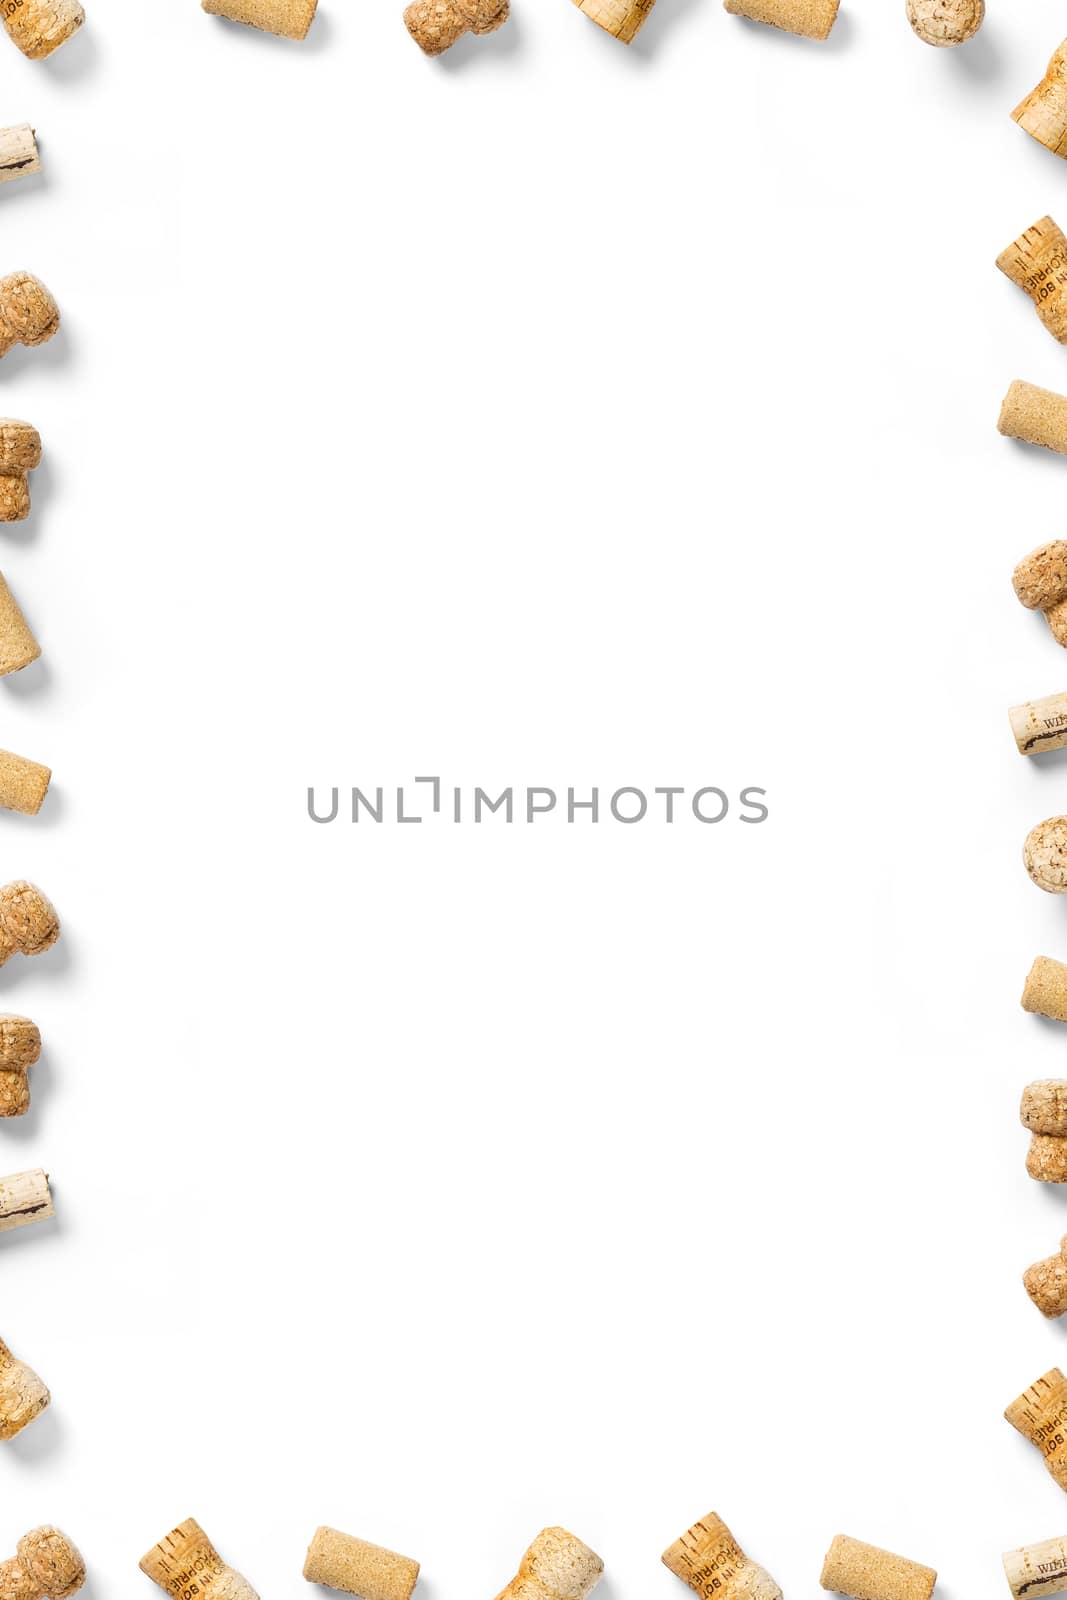 wine corks creative flat lay layout on a white backlit background. flatlay creative wine set with corks and corkscrew for design concept. by PhotoTime